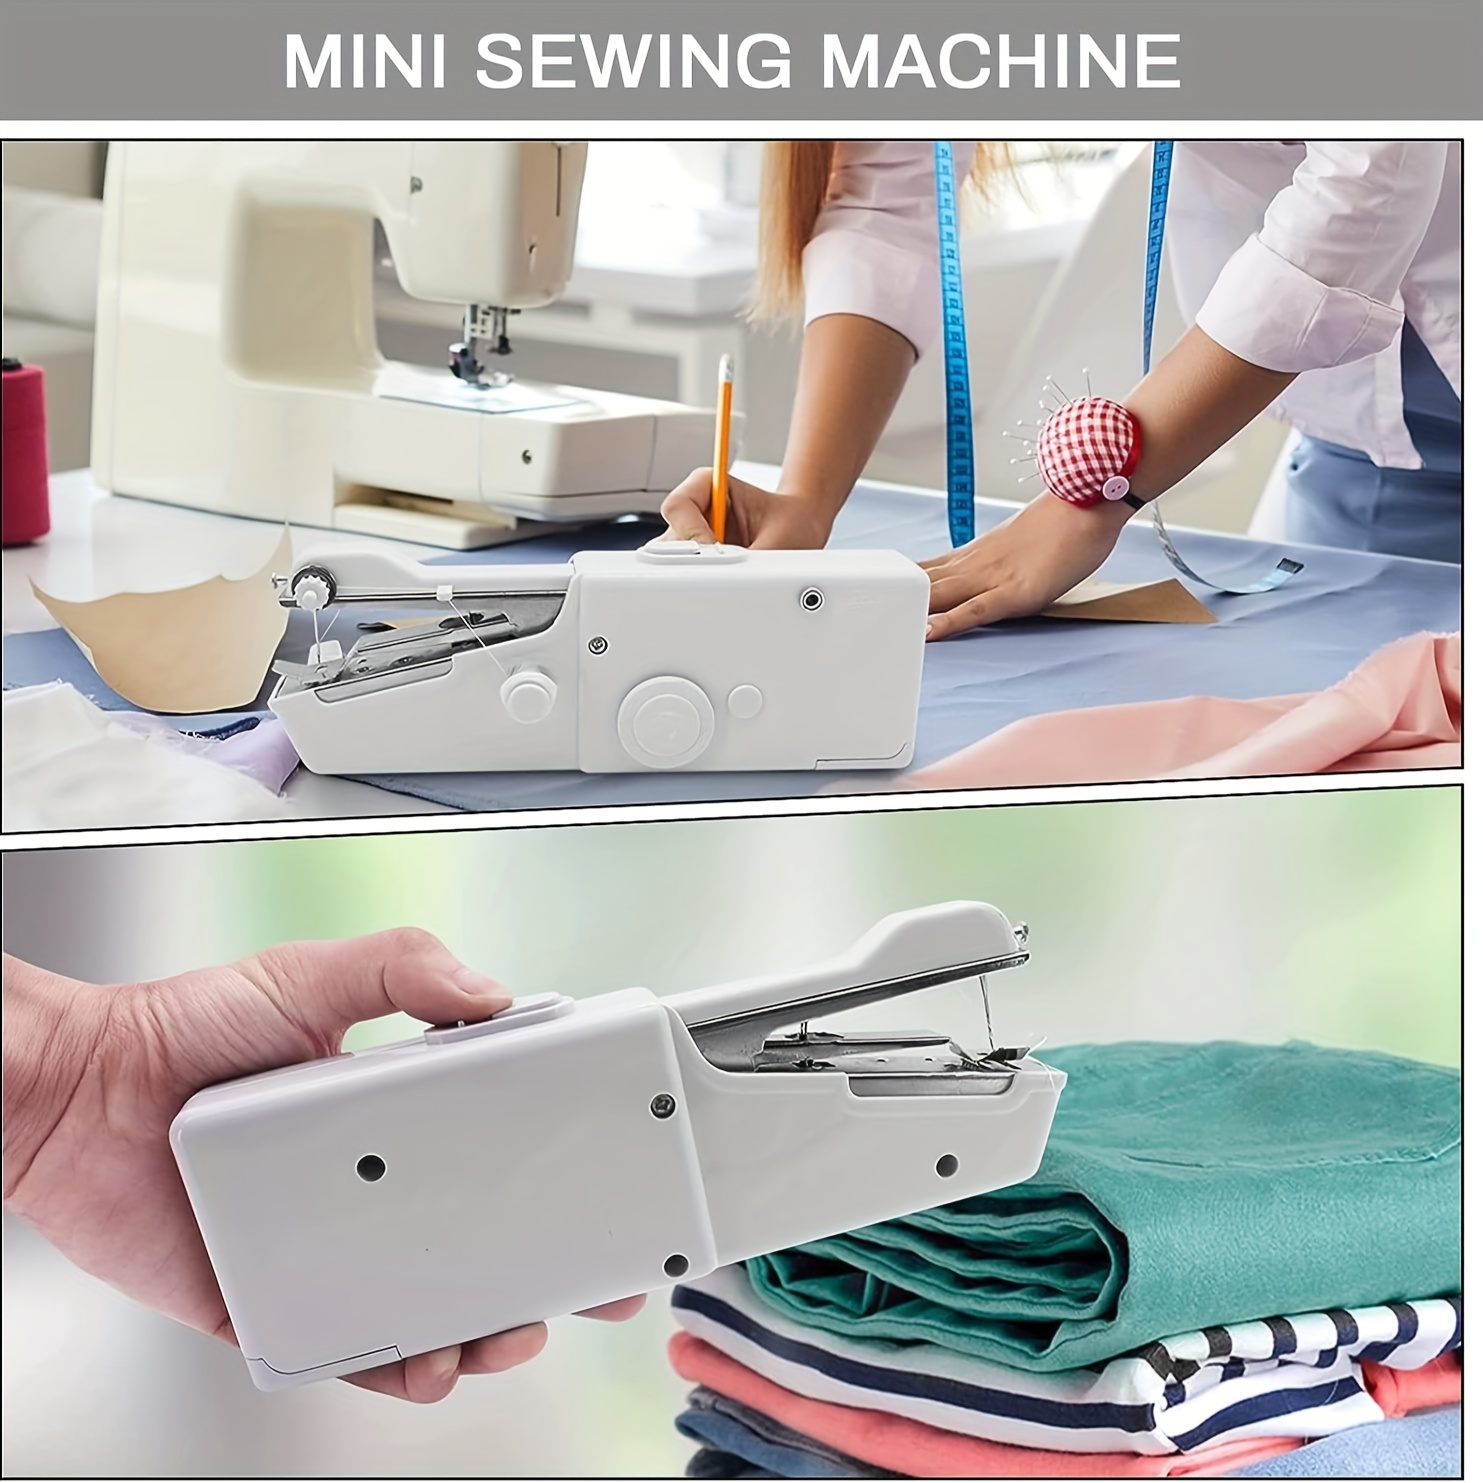 HOME :: Tools :: Tools for clothes :: Portable Handheld Sewing Machine 